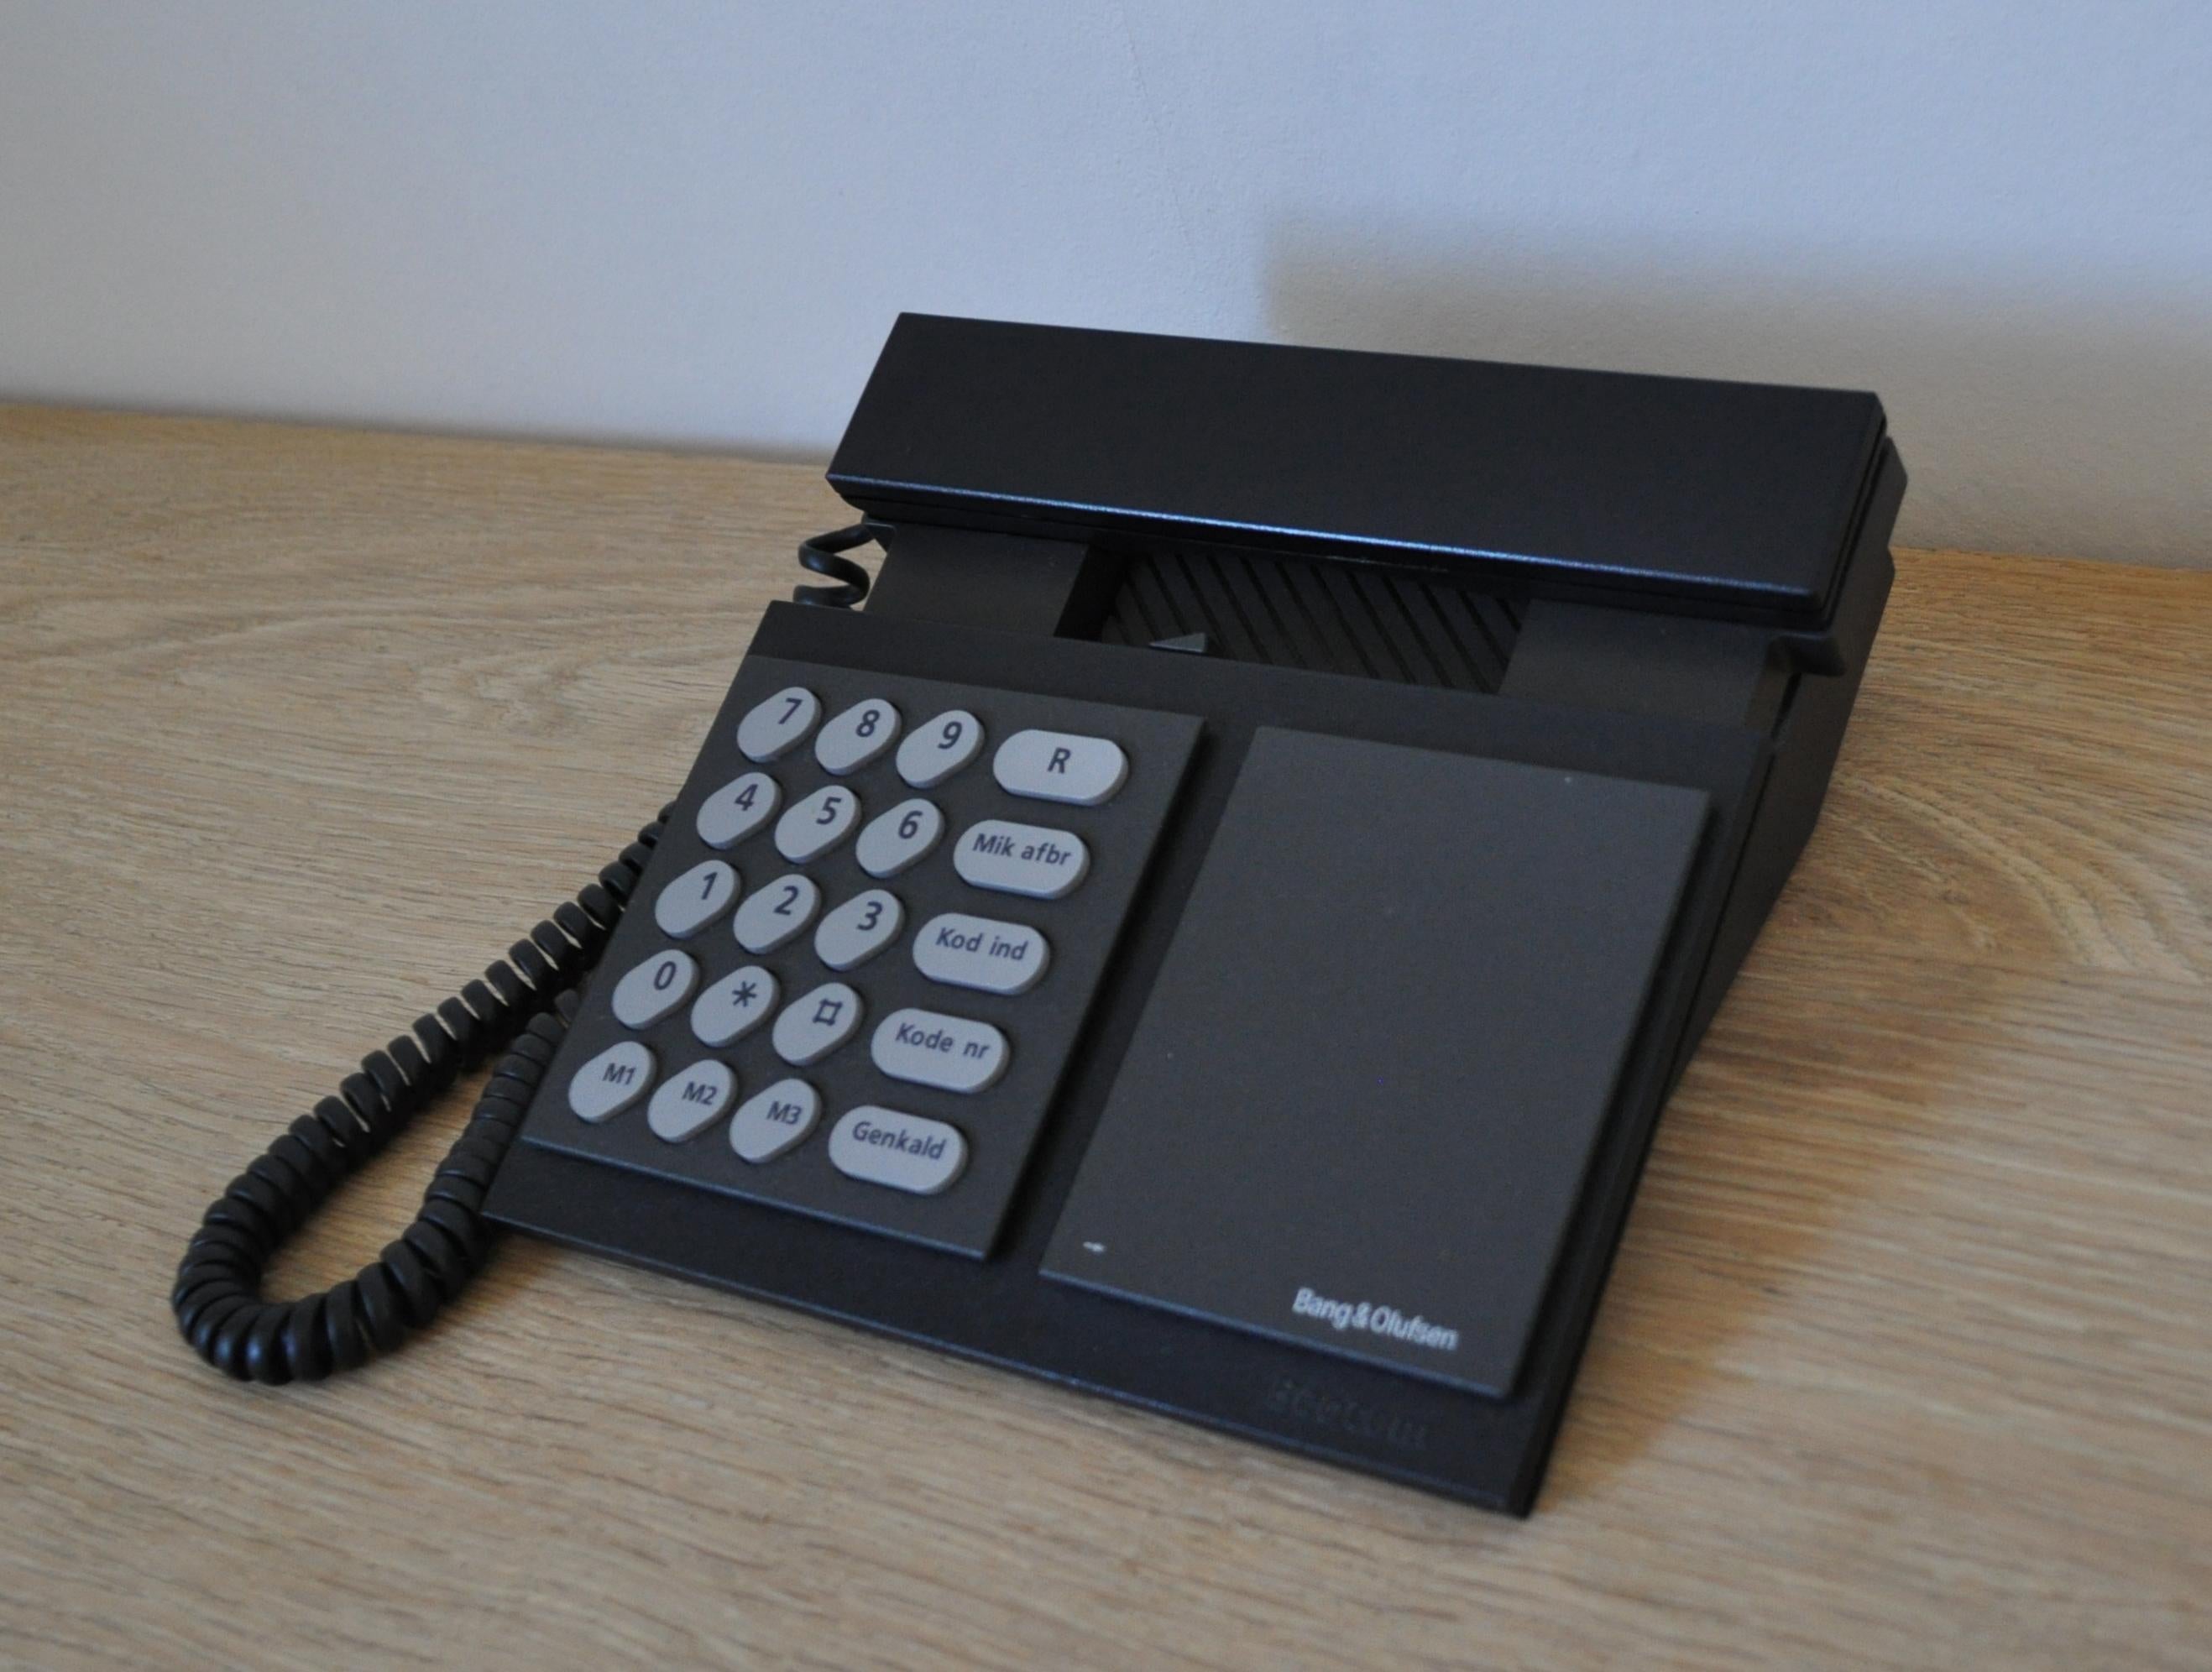 Beocom 600 telephone from 1986 by Bang & Olusfen.
Fully functional.

History: 